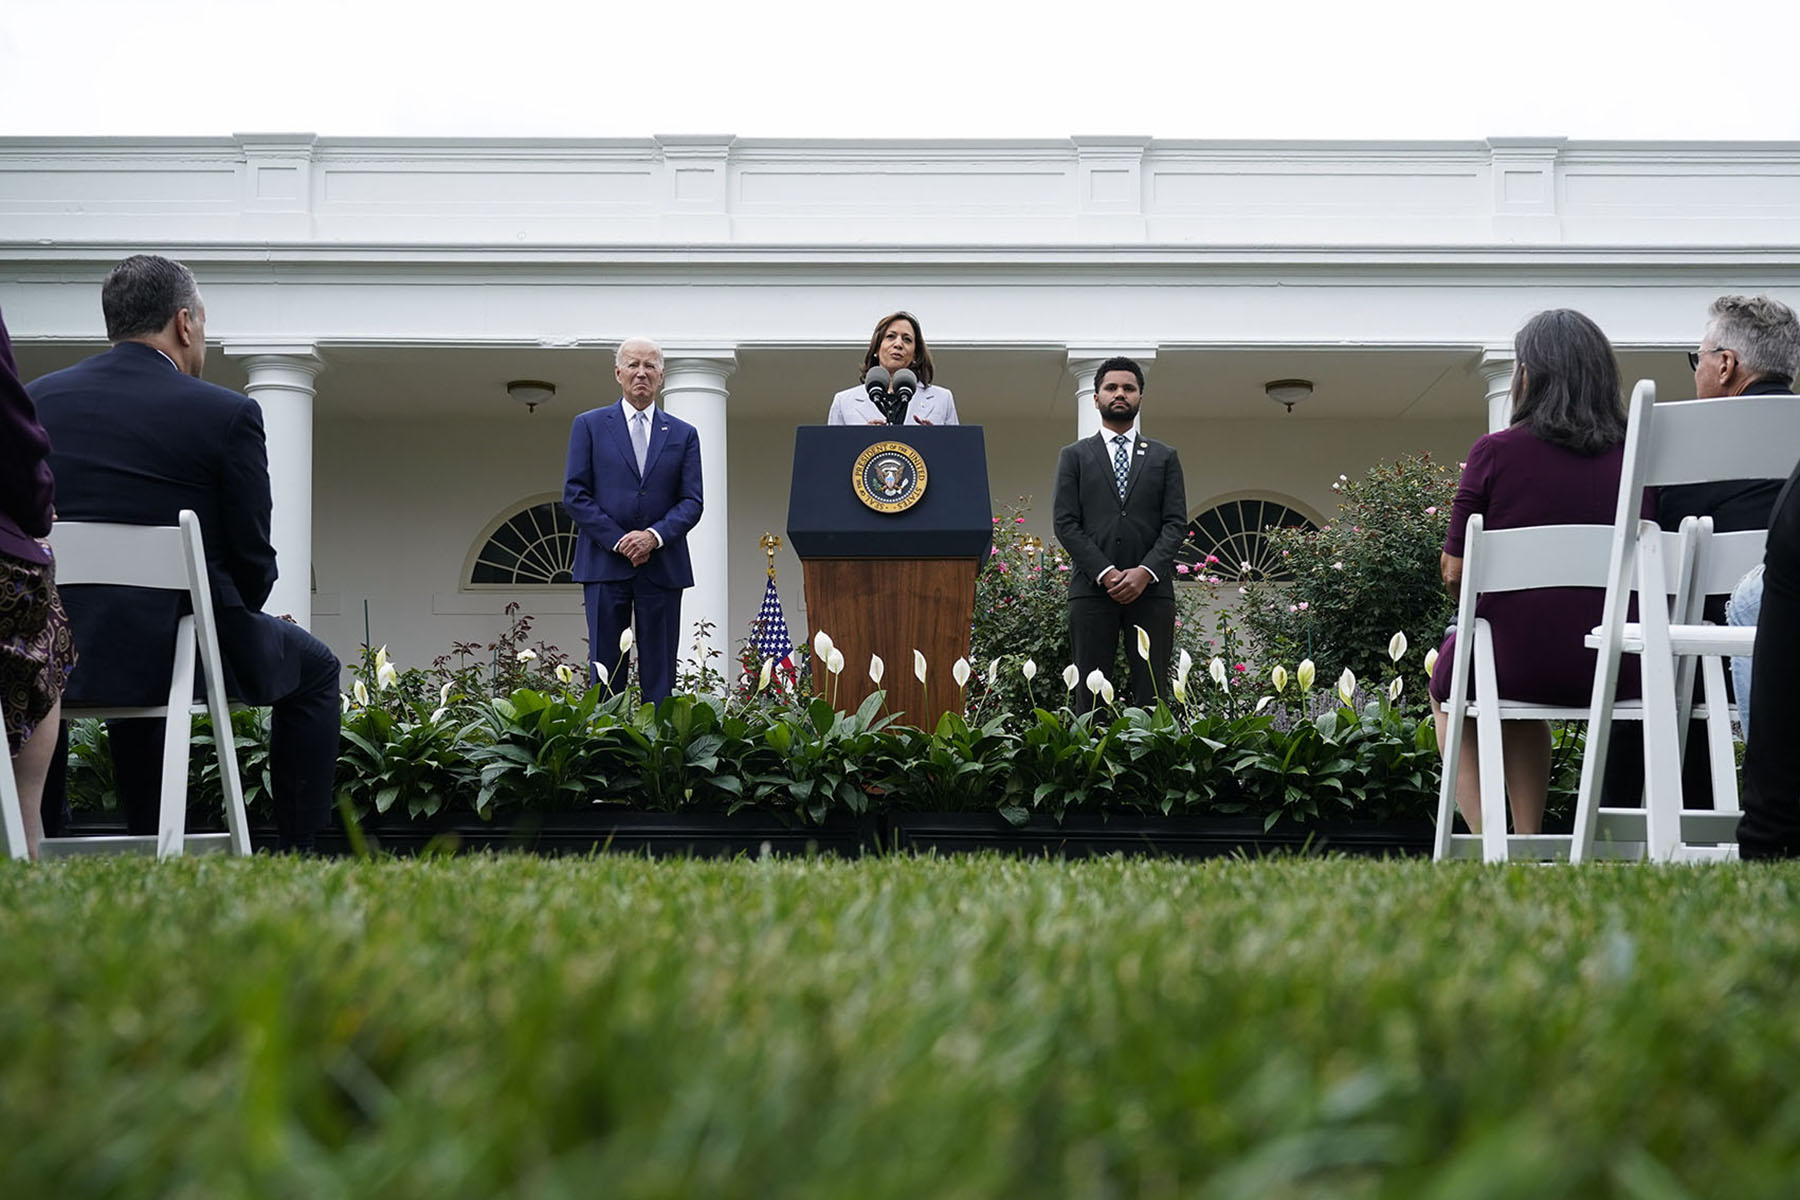 Vice President Kamala Harris speaks about gun safety from the Rose Garden of the White House. Besides her are President Joe Biden and Rep. Maxwell Frost.